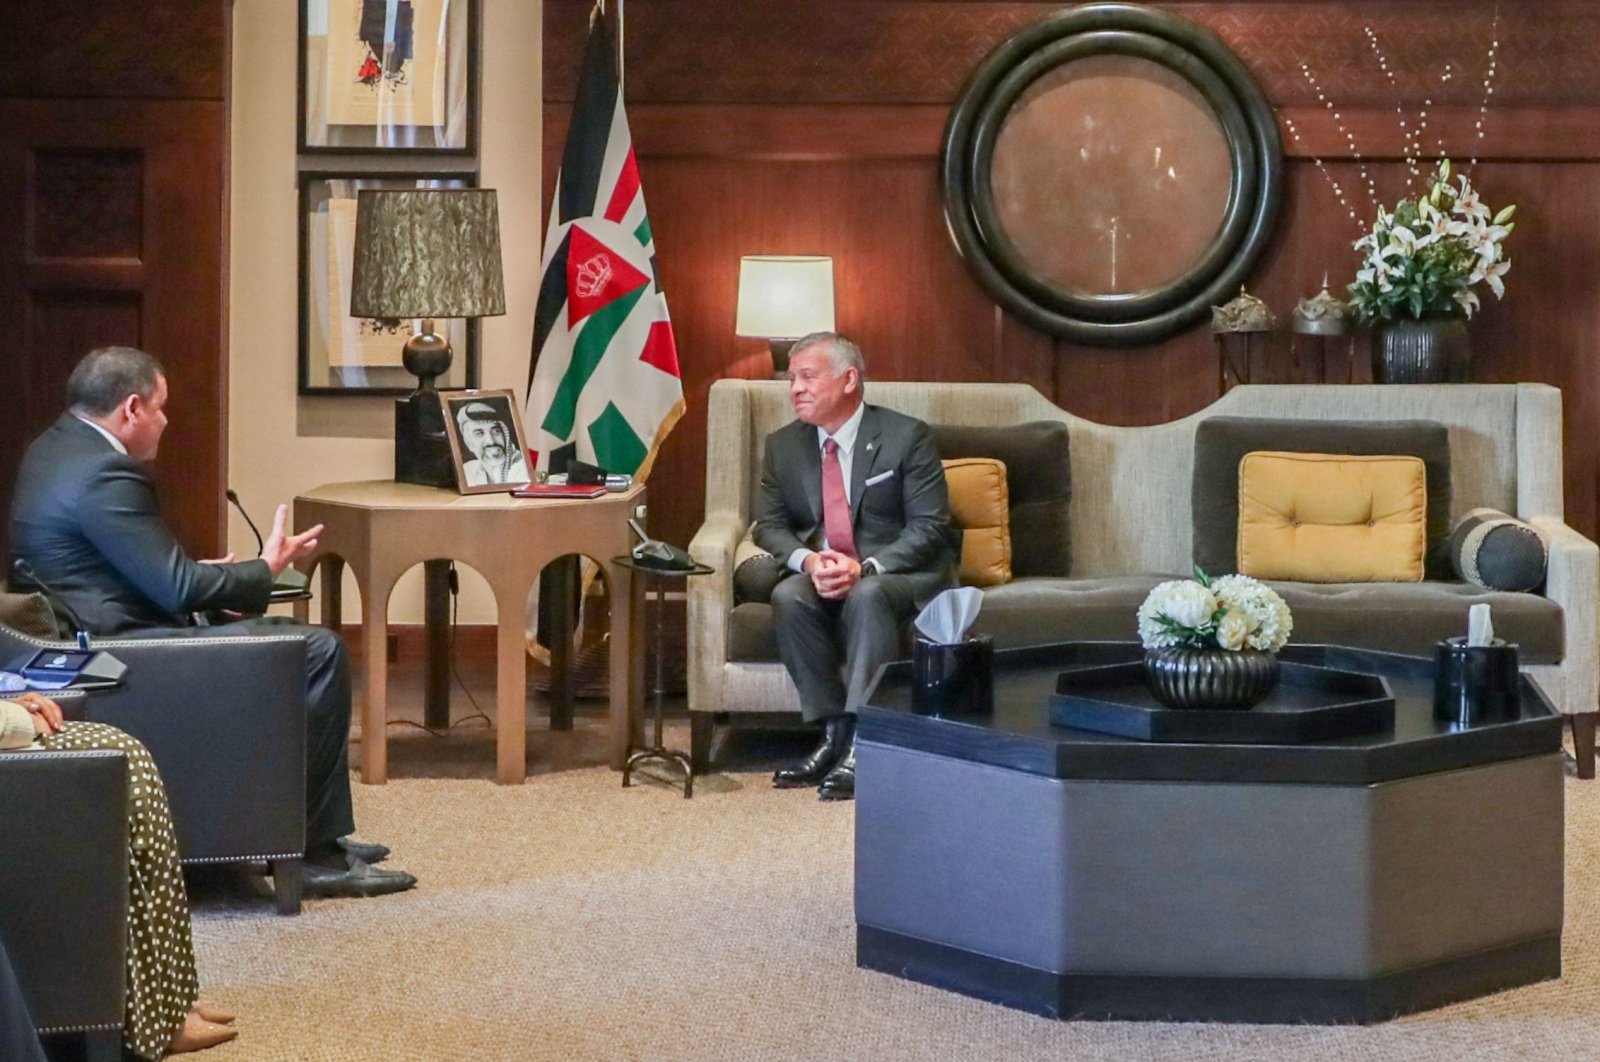 A handout picture released by the Jordanian Royal Palace shows Jordanian King Abdullah II (C) receiving Libyan Prime Minister Abdul Hamid Dbeibah (L) in the capital Amman, Aug. 29, 2021. (Photo by Yousef Allan / Jordanian Royal Palace / AFP) 